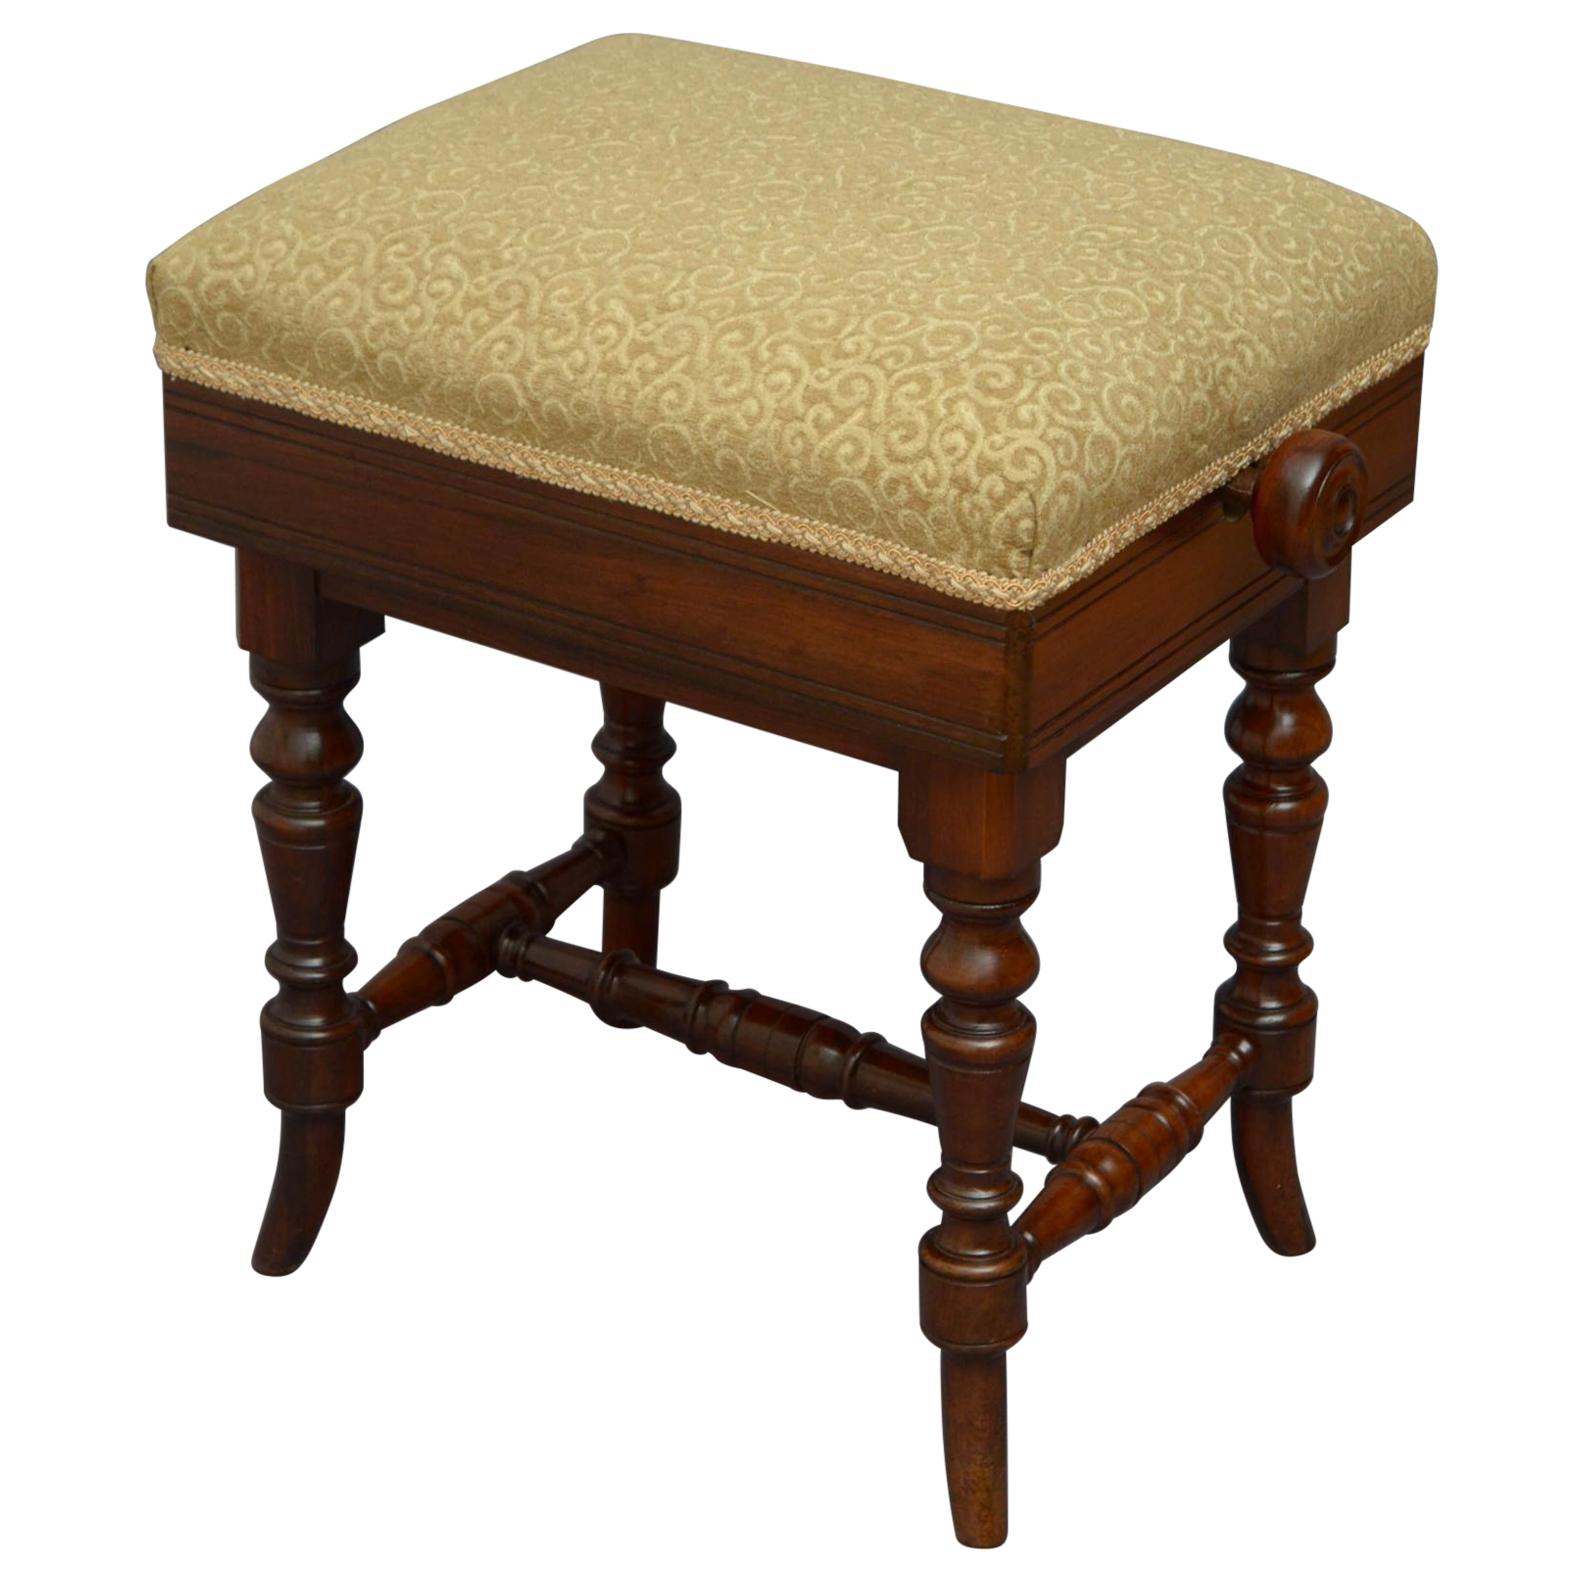 Superb Quality Victorian Stool in Rosewood